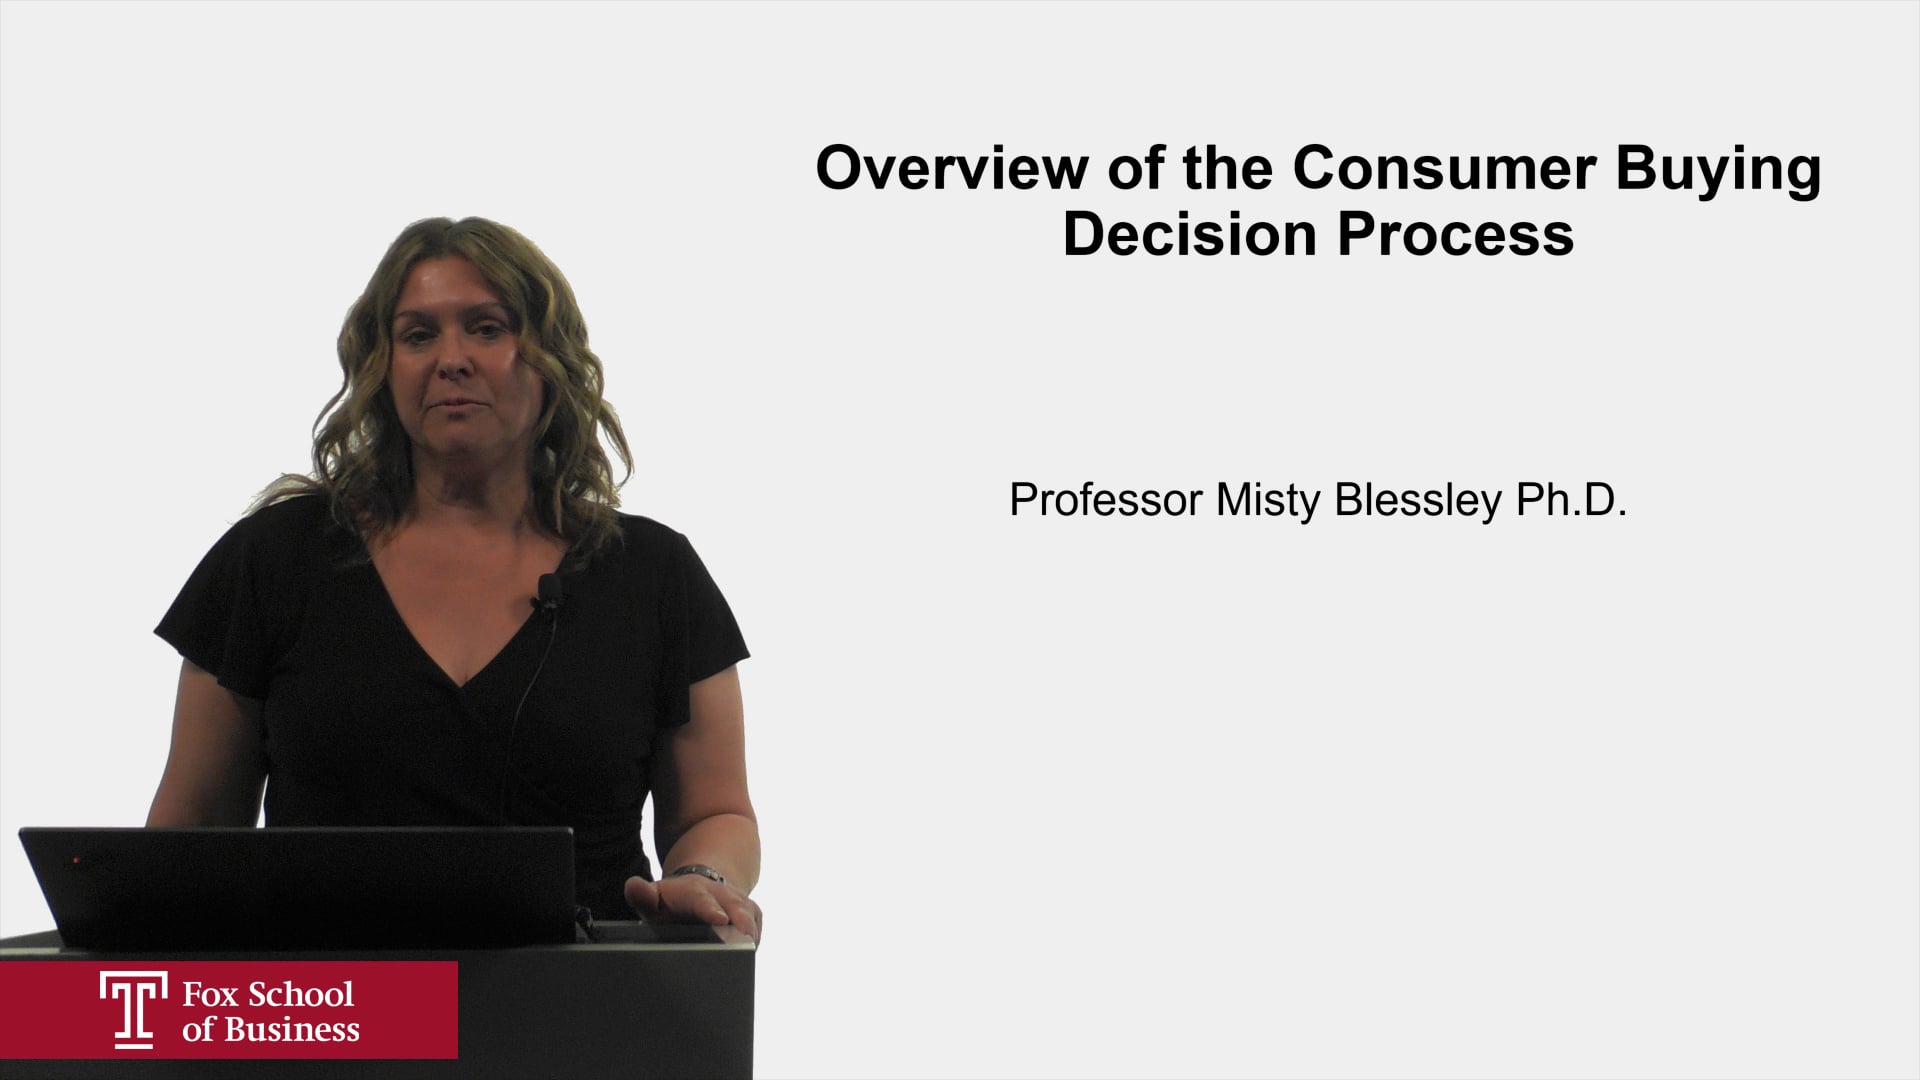 Overview of the Consumer Buying Decision Process